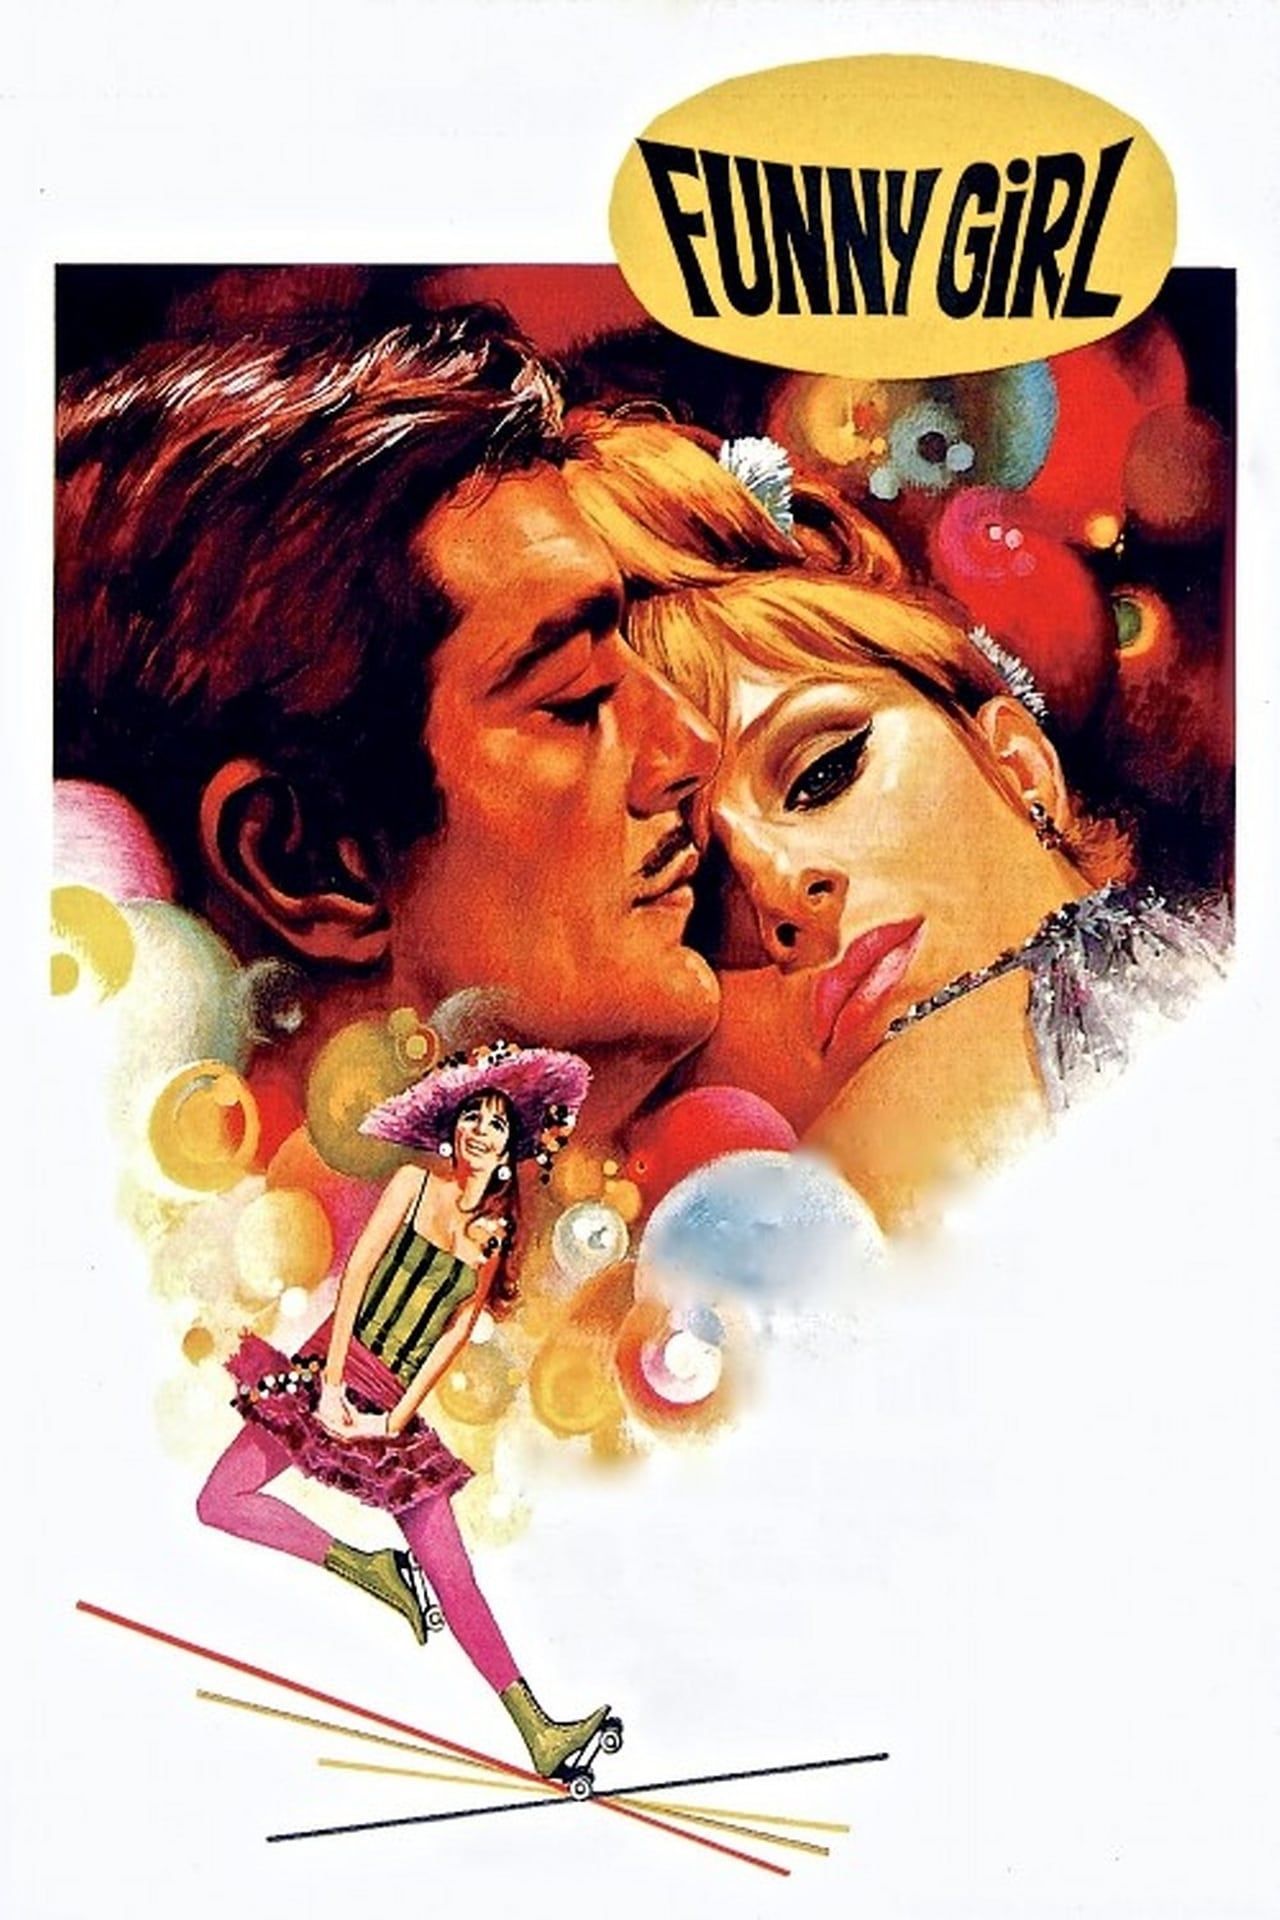 Funny Girl Movie Poster Showing Barbra Streisand and Omar Sharif Embracing and a Woman on Roller Skates